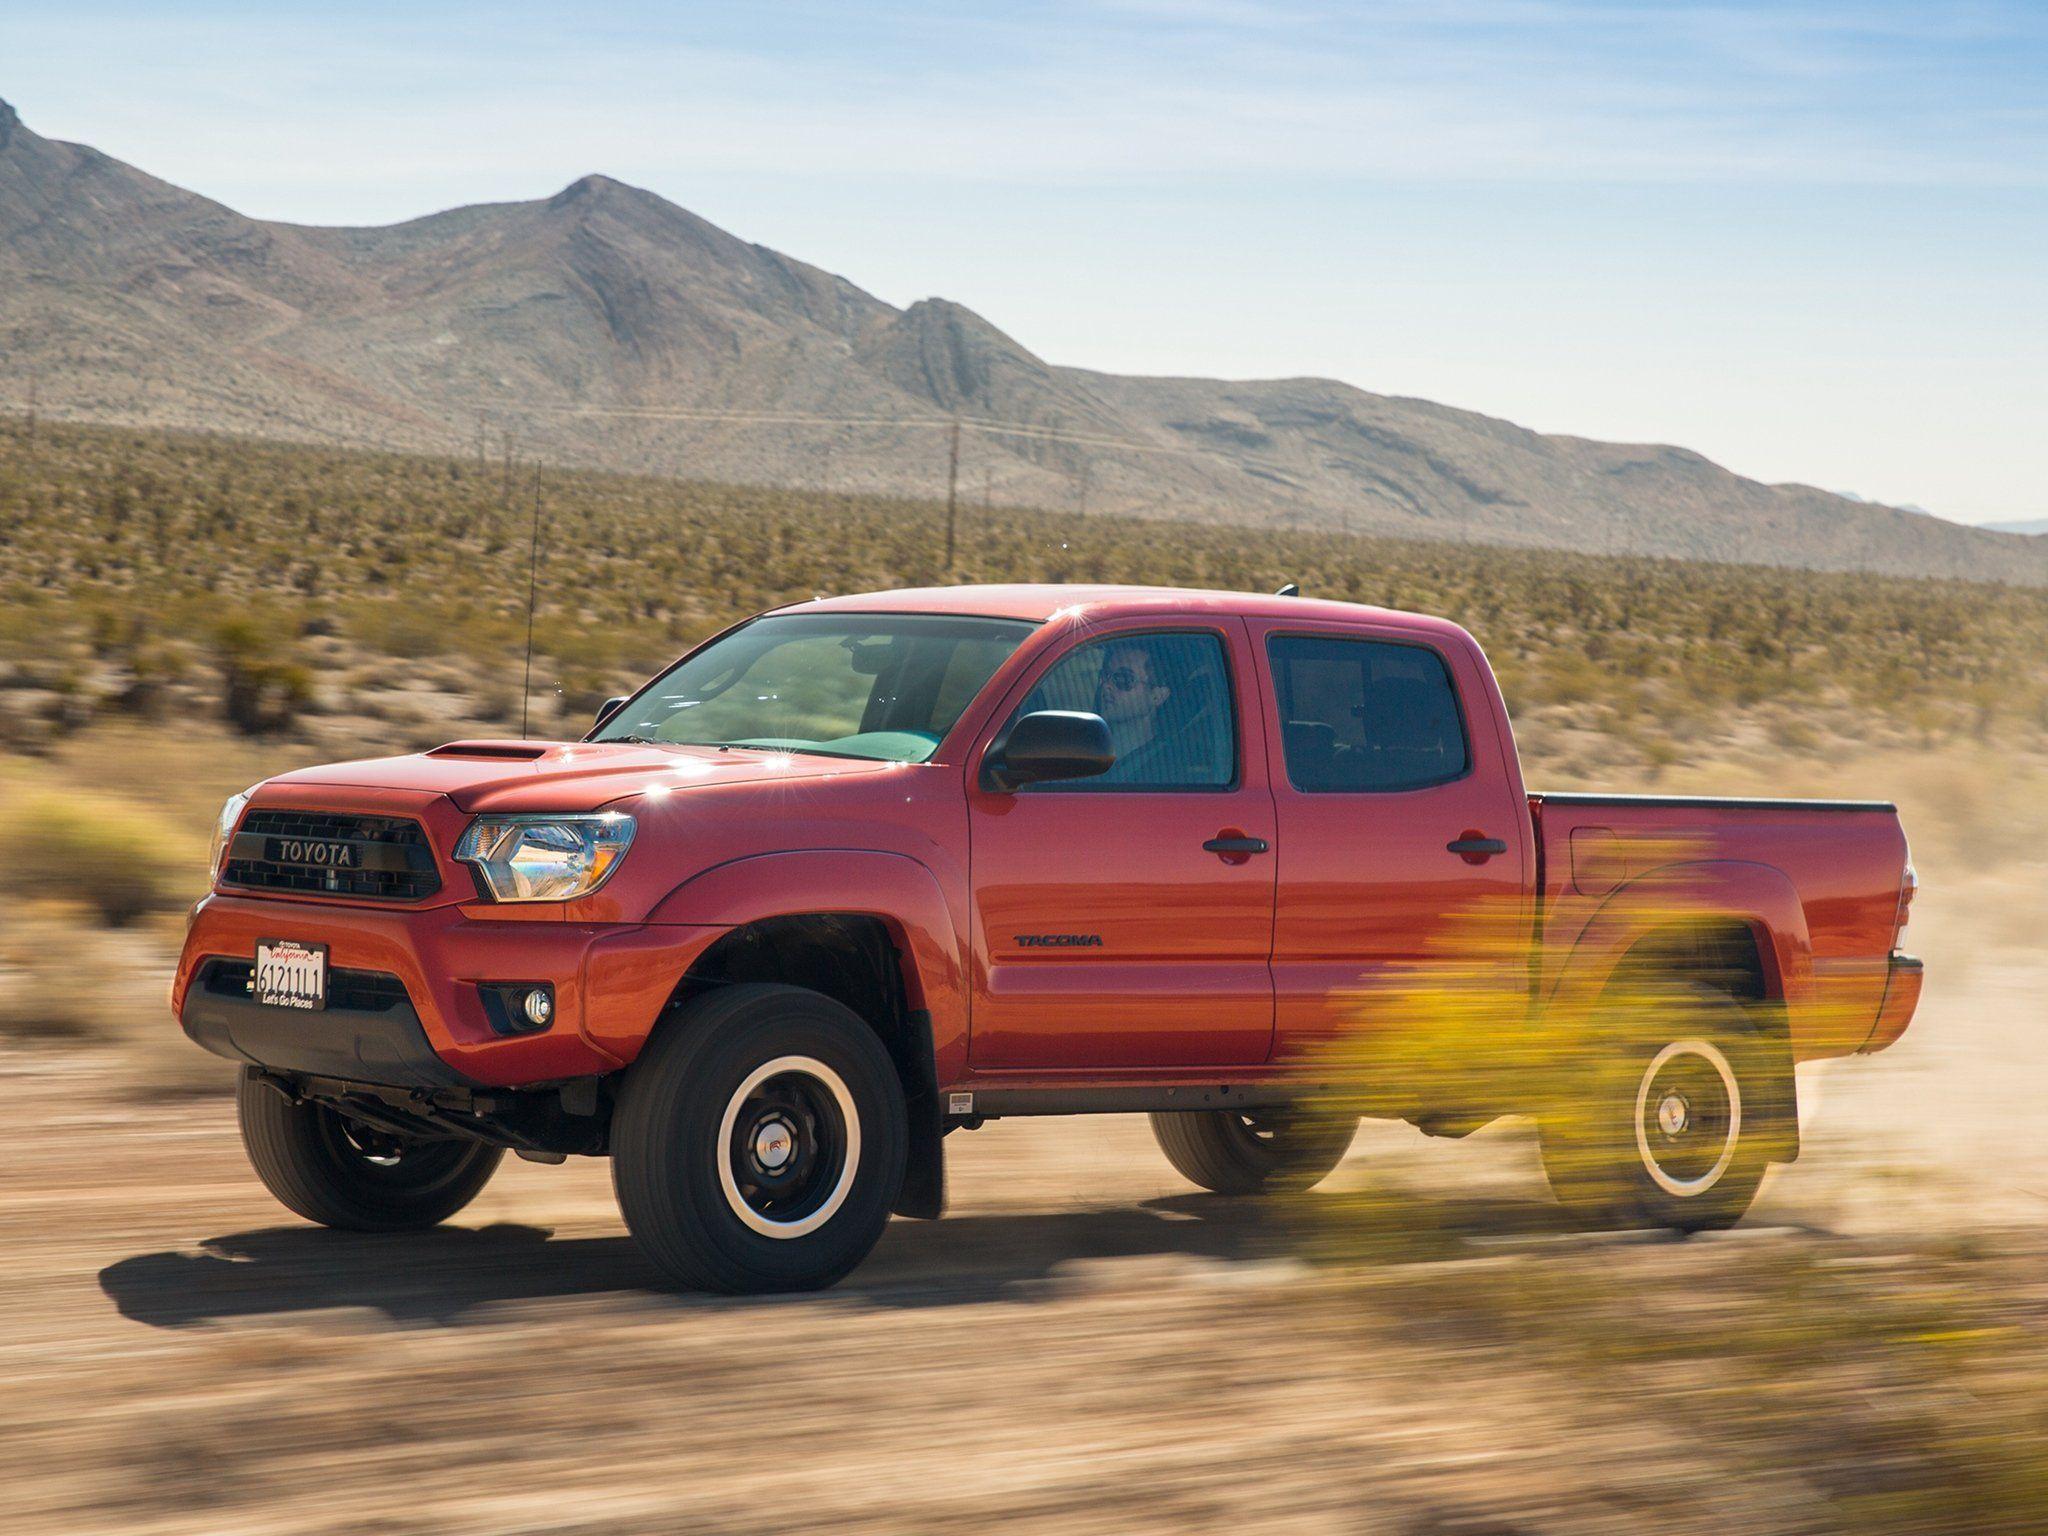 Toyota Truck Wallpapers